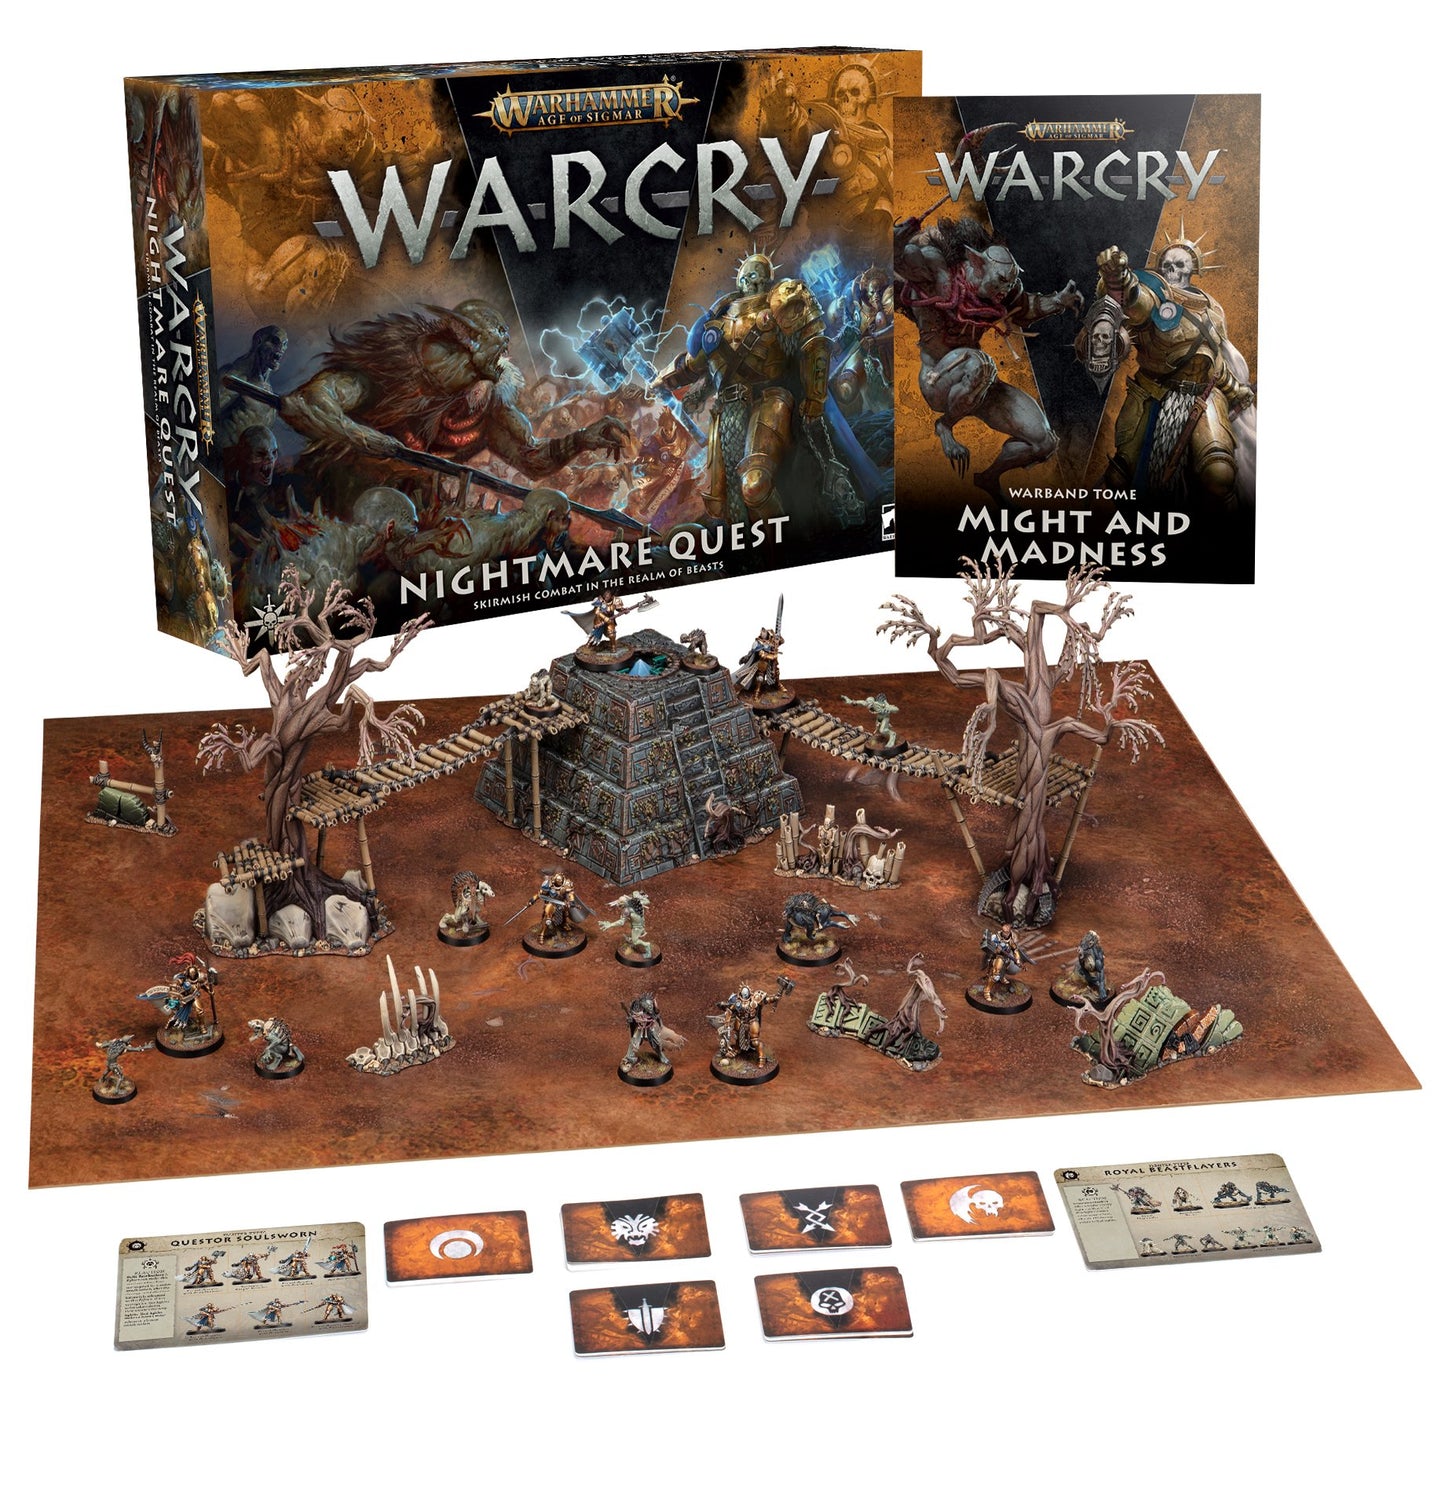 LAST ONE - WarCry: Nightmare Quest